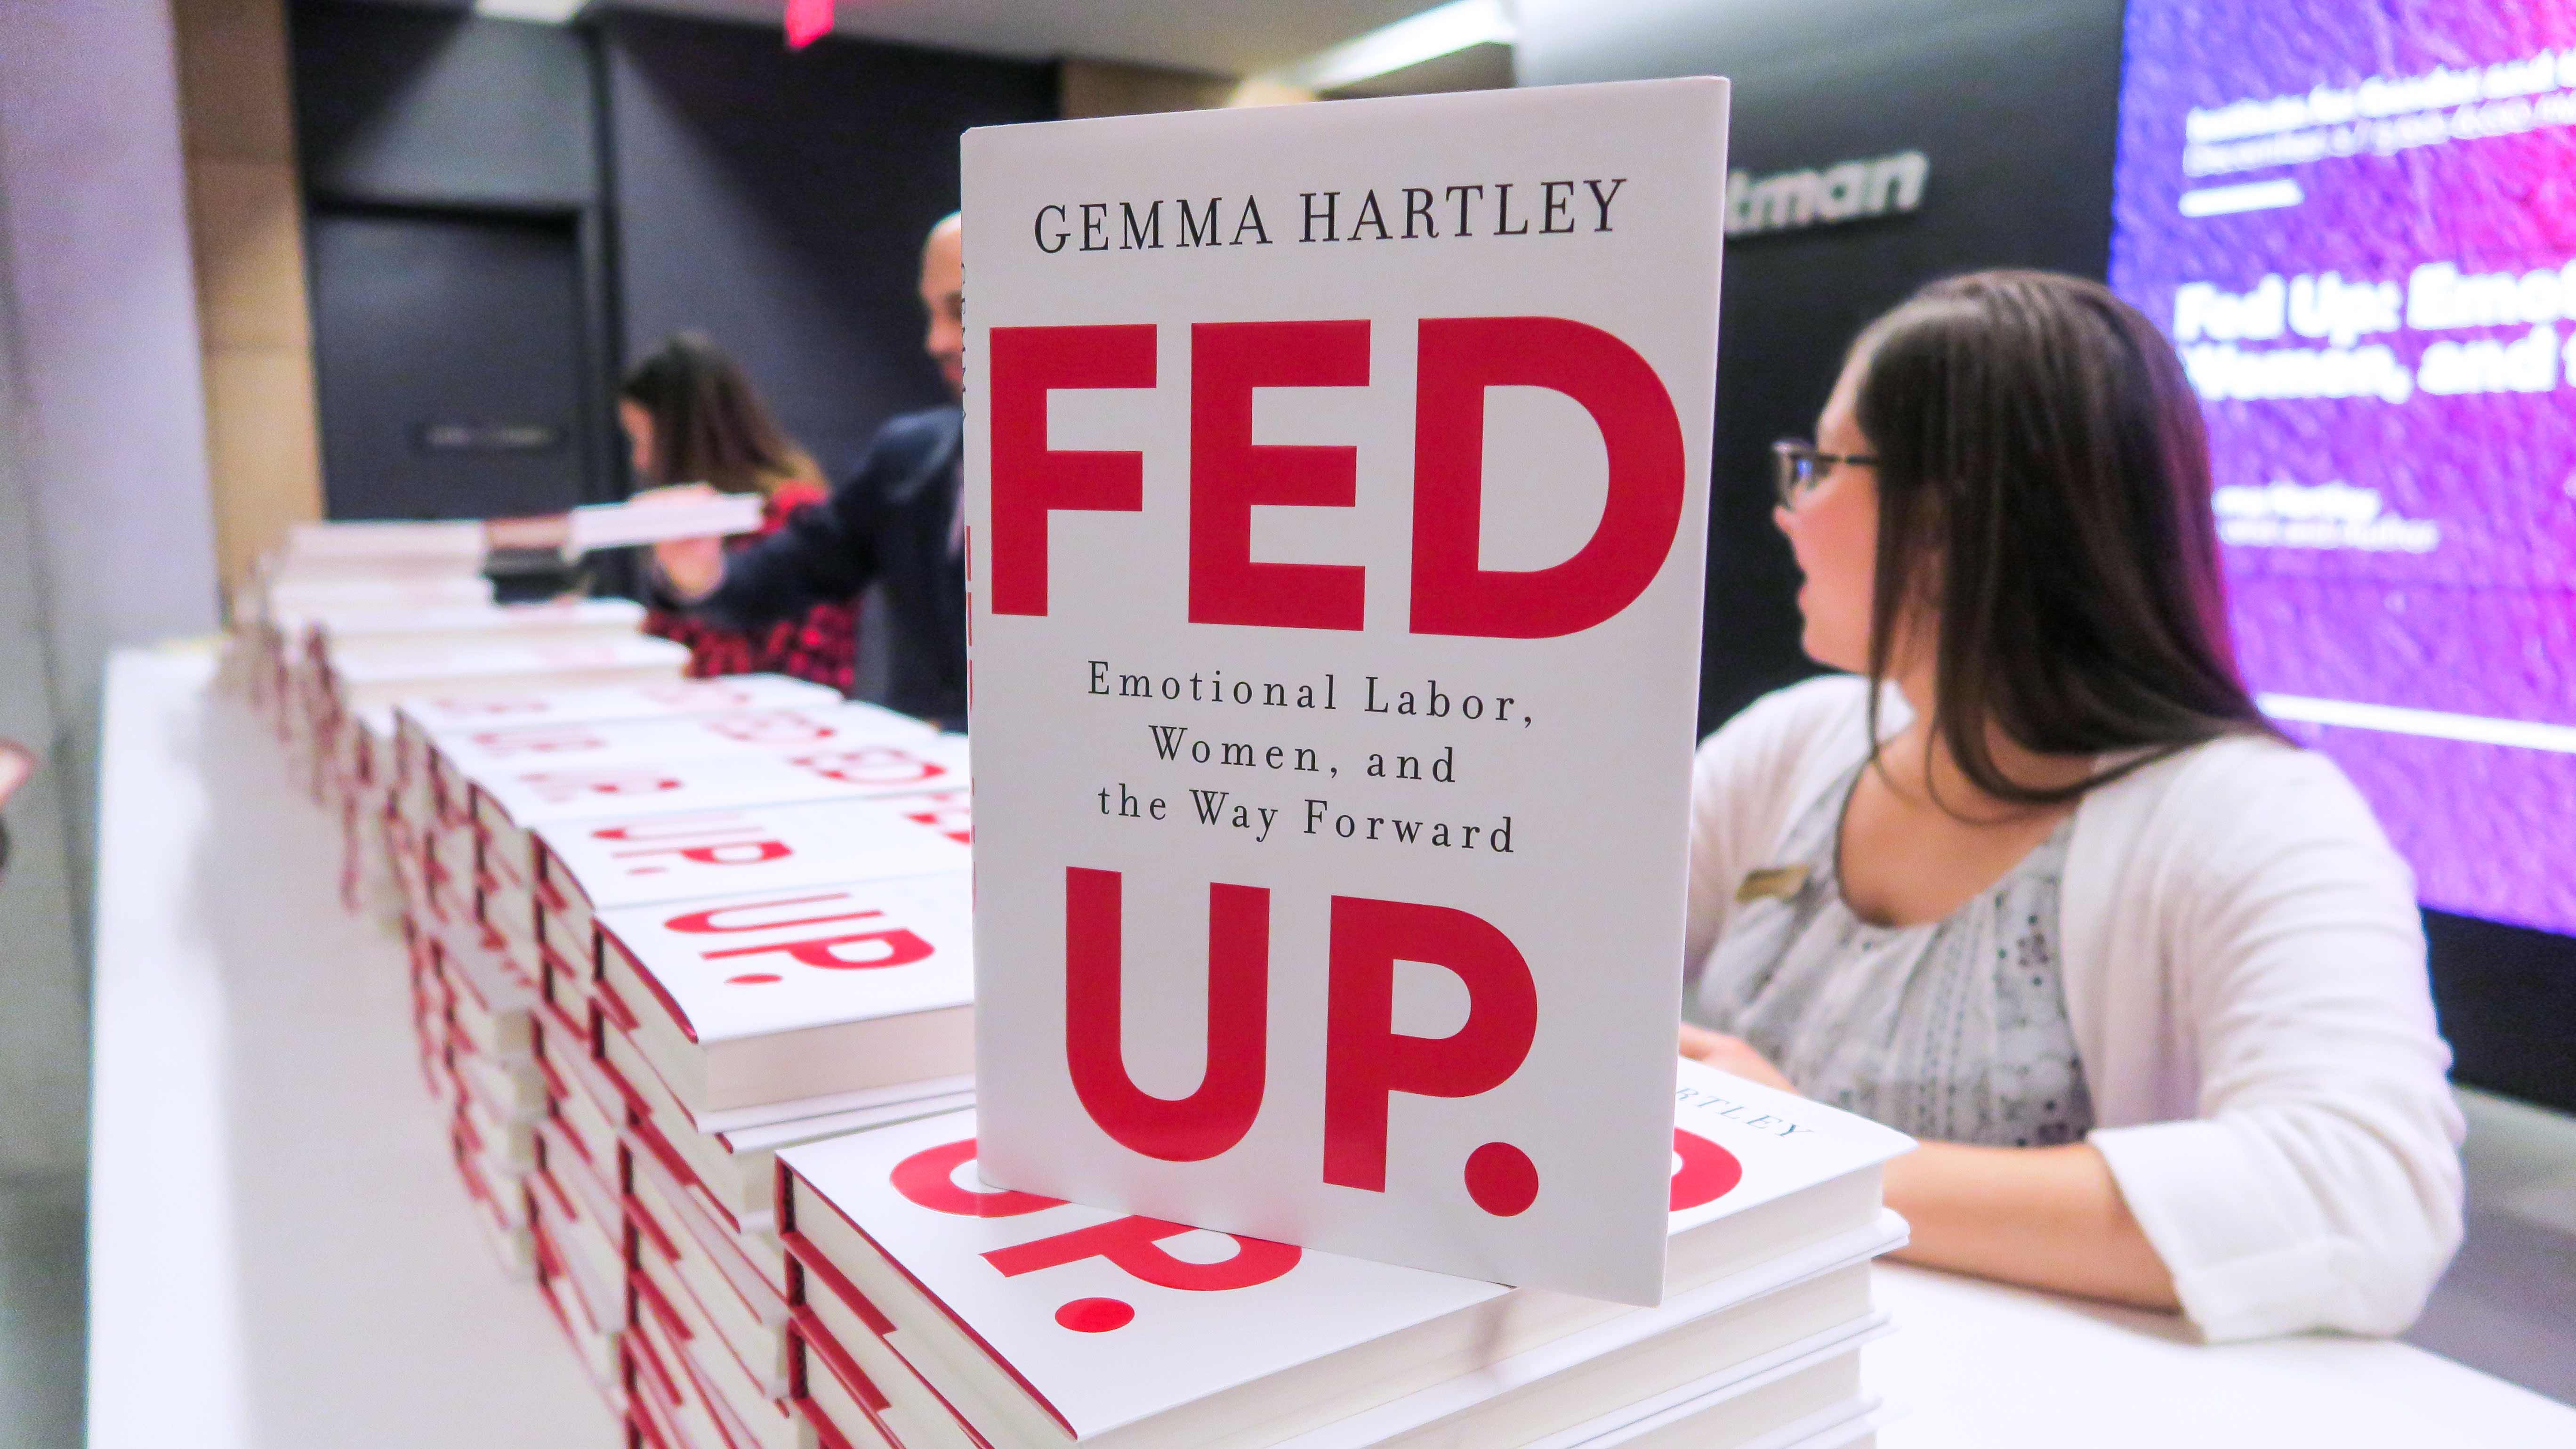 Cover of book "Fed Up" stacked on event registration table